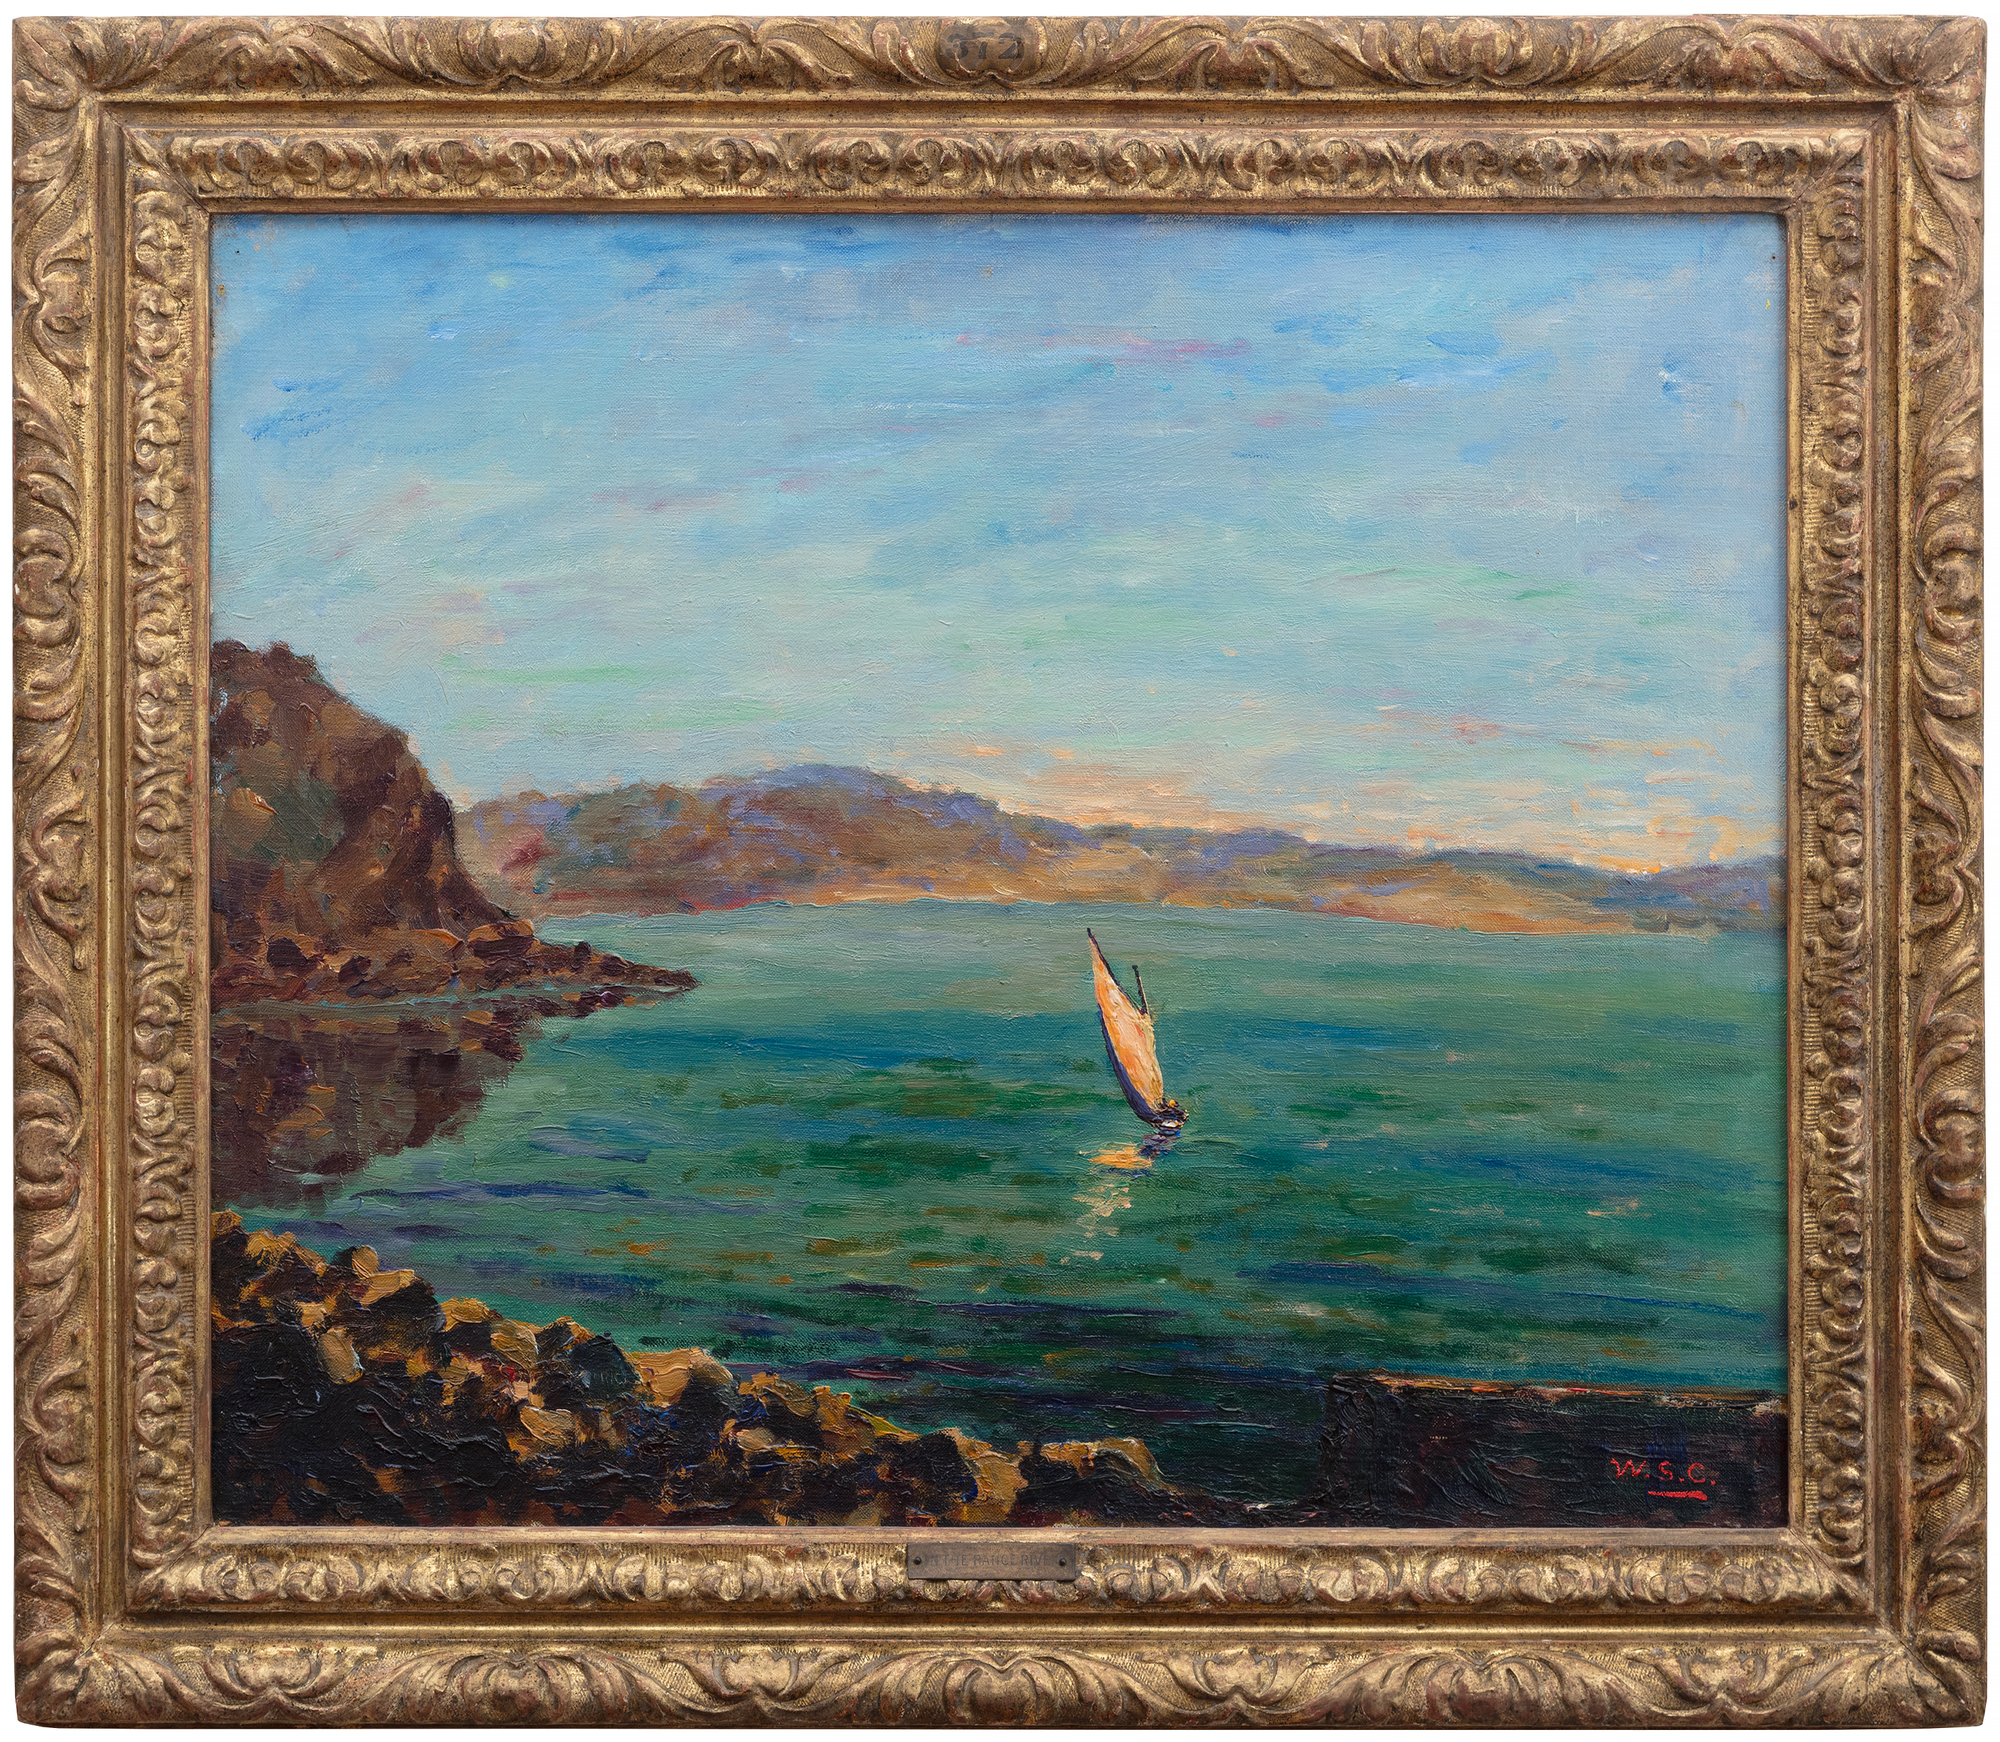 In 1955, Sir John Rothenstein, representing the Trustees of the Tate Museum, approached Winston Churchill about donating one of his paintings &quot;as a gift to the nation.&quot;  Churchill was flattered, but felt he did not deserve such an honor as an artist.  Eventually, Churchill agreed and sent two candidate paintings to the Tate – On the Rance and Loup River.  No record exists regarding his own thoughts on the works he submitted, but one can safely say that Churchill thought highly of On the Rance, especially since it was not one of the paintings Rothenstein identified as a strong option. Loup River, which clearly matched Rothenstein&#039;s taste, was selected.  Not only was On the Rance not returned, but somehow it ended up, without any inventory record, in a basement storeroom at the Tate. In the storeroom it sat for almost a half century, when it was discovered by an intern.  The Churchill family was notified and eventually the painting was auctioned in June 2005, where it set a new auction record for Churchill&#039;s work, despite the lot notes hardly touching on the Tate’s possible acquisition. In a letter to the buyers, Churchill’s daughter, Lady Soames, summarized what had occurred in somewhat more detail.&lt;br&gt;&lt;br&gt;St. Malo is a walled city in Brittany, France on the coast of the English Channel. The city was nearly destroyed by bombings during WWII.